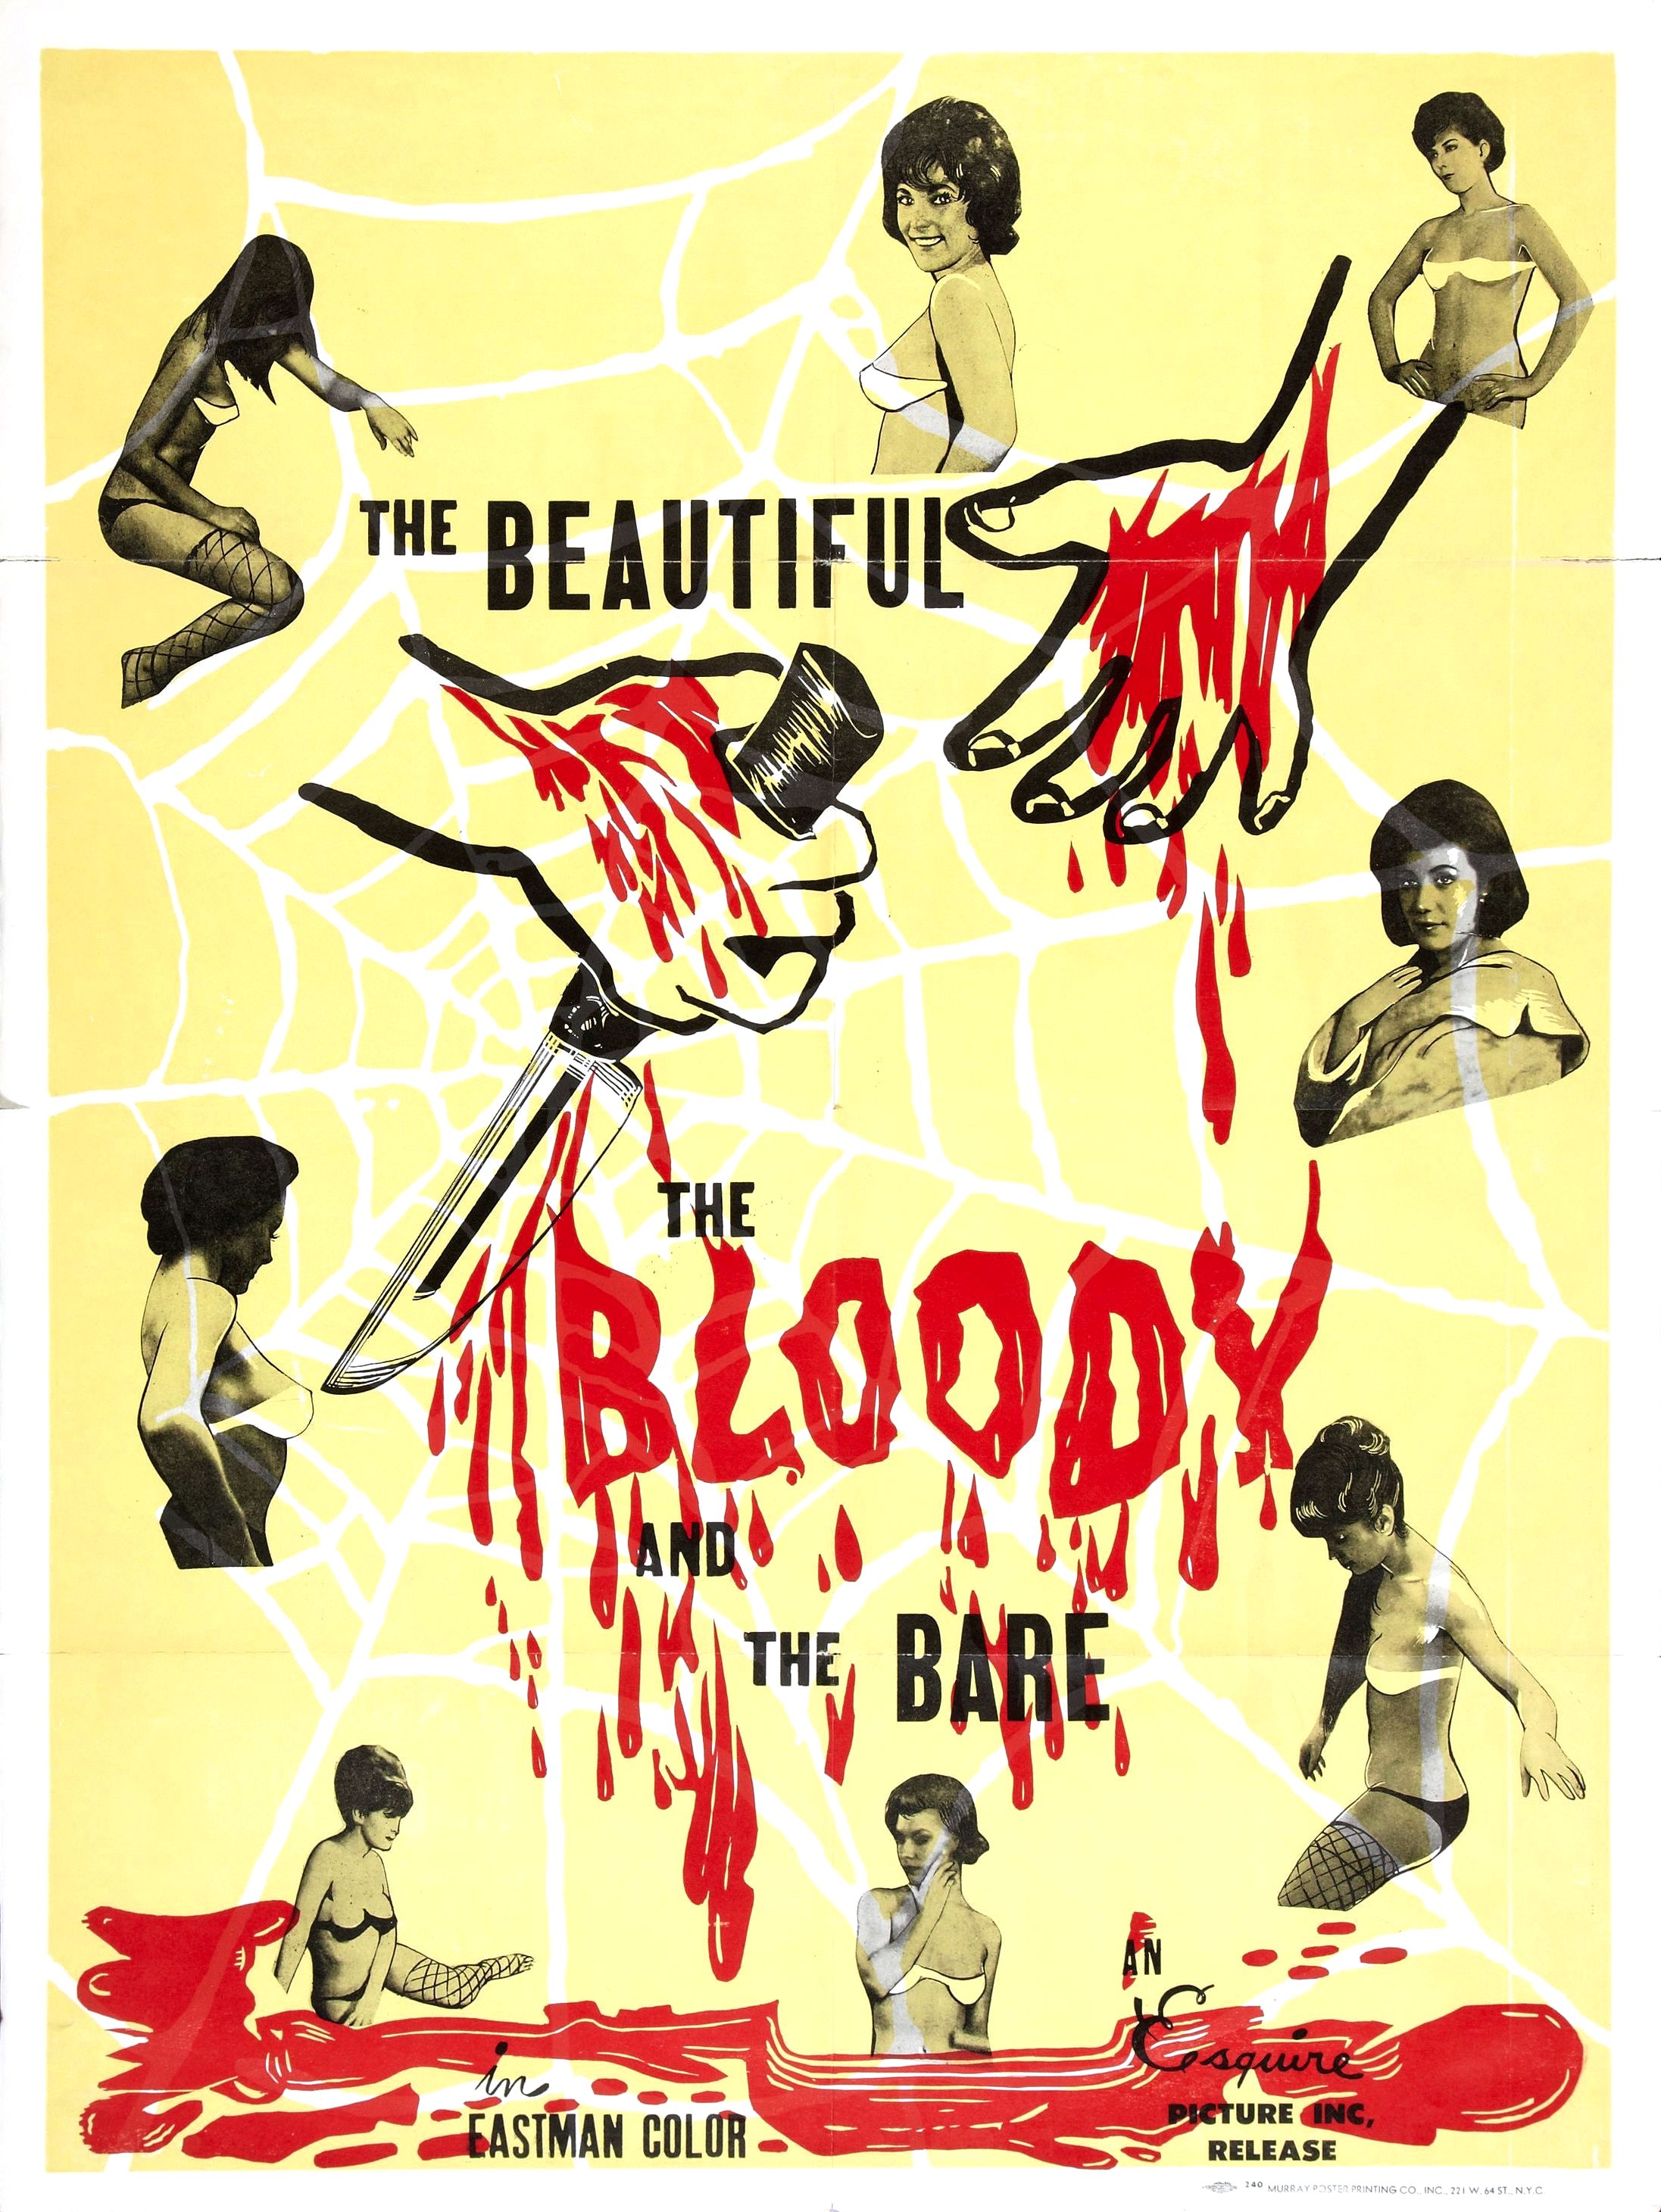 The Beautiful, the Bloody, and the Bare (1964) Screenshot 3 